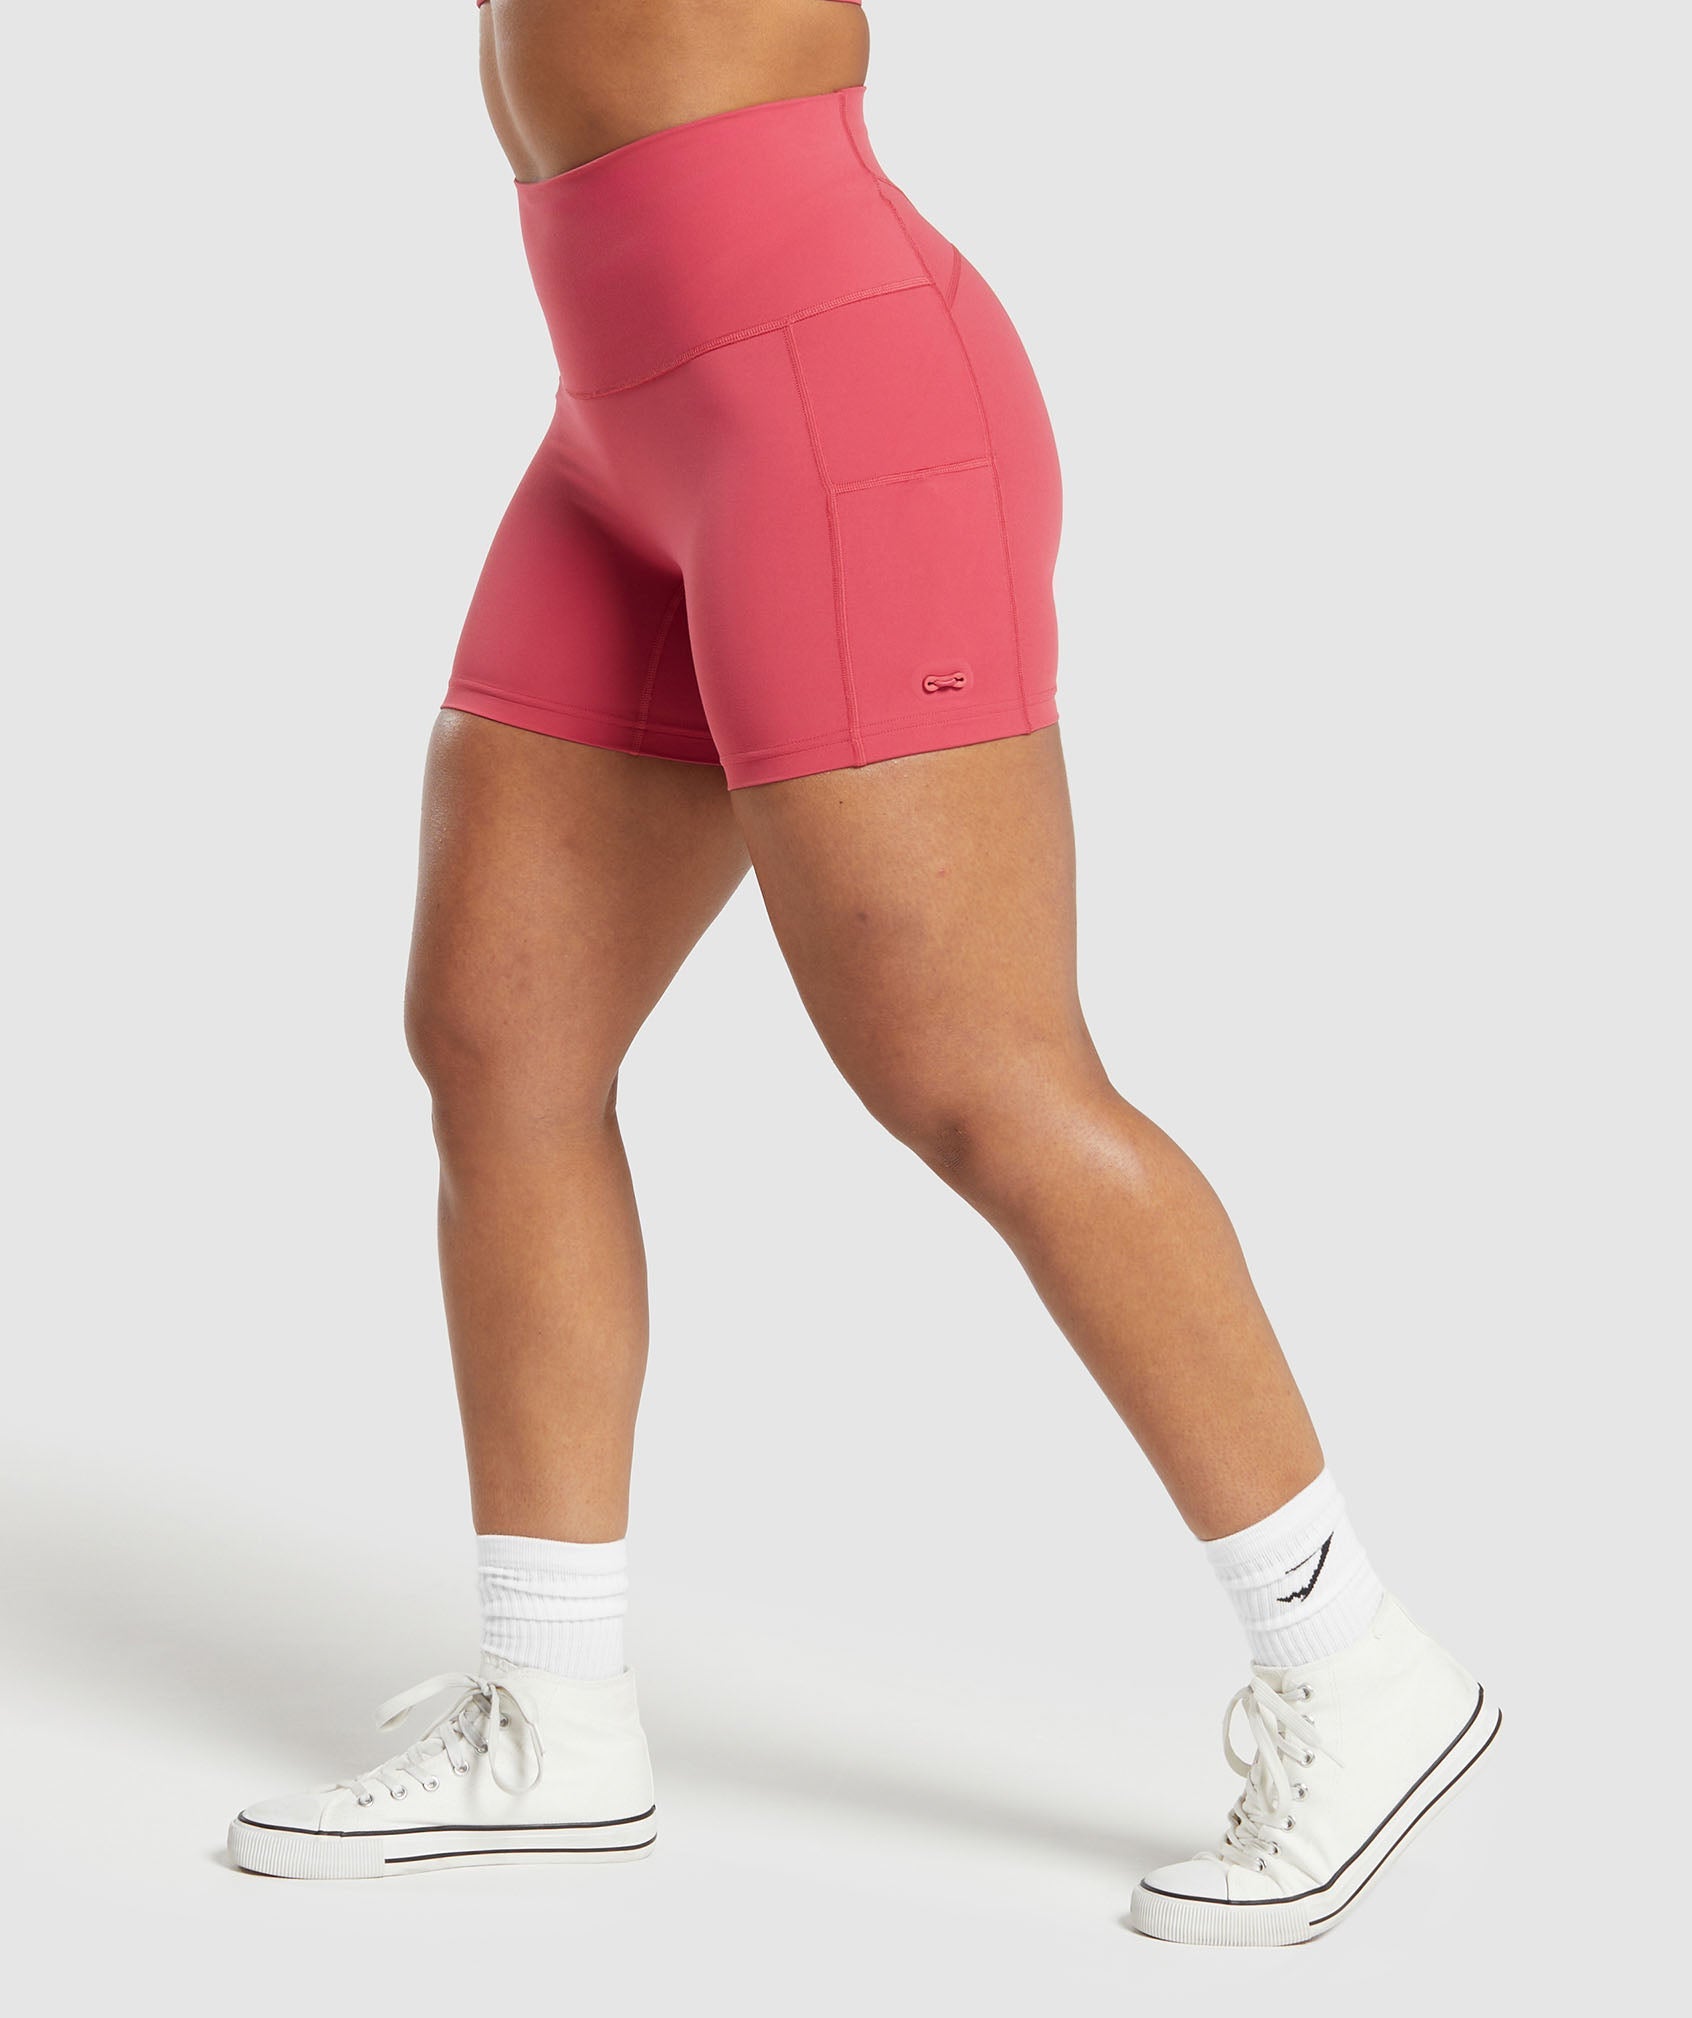 Legacy Tight Shorts in Vintage Pink - view 3